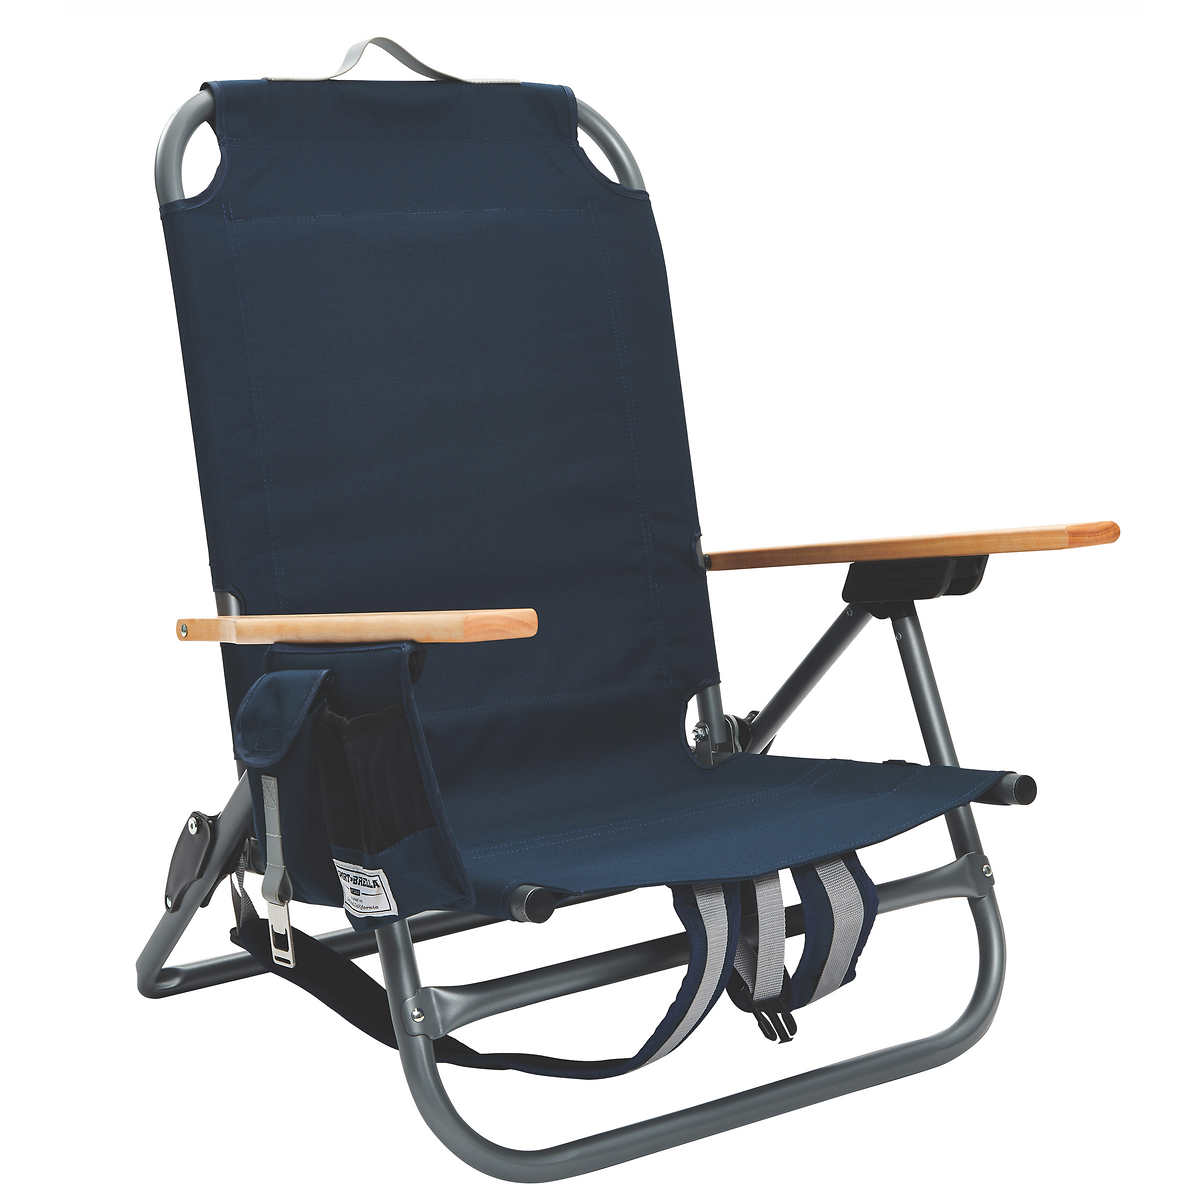 Sunsoul Backpack Chair Costco